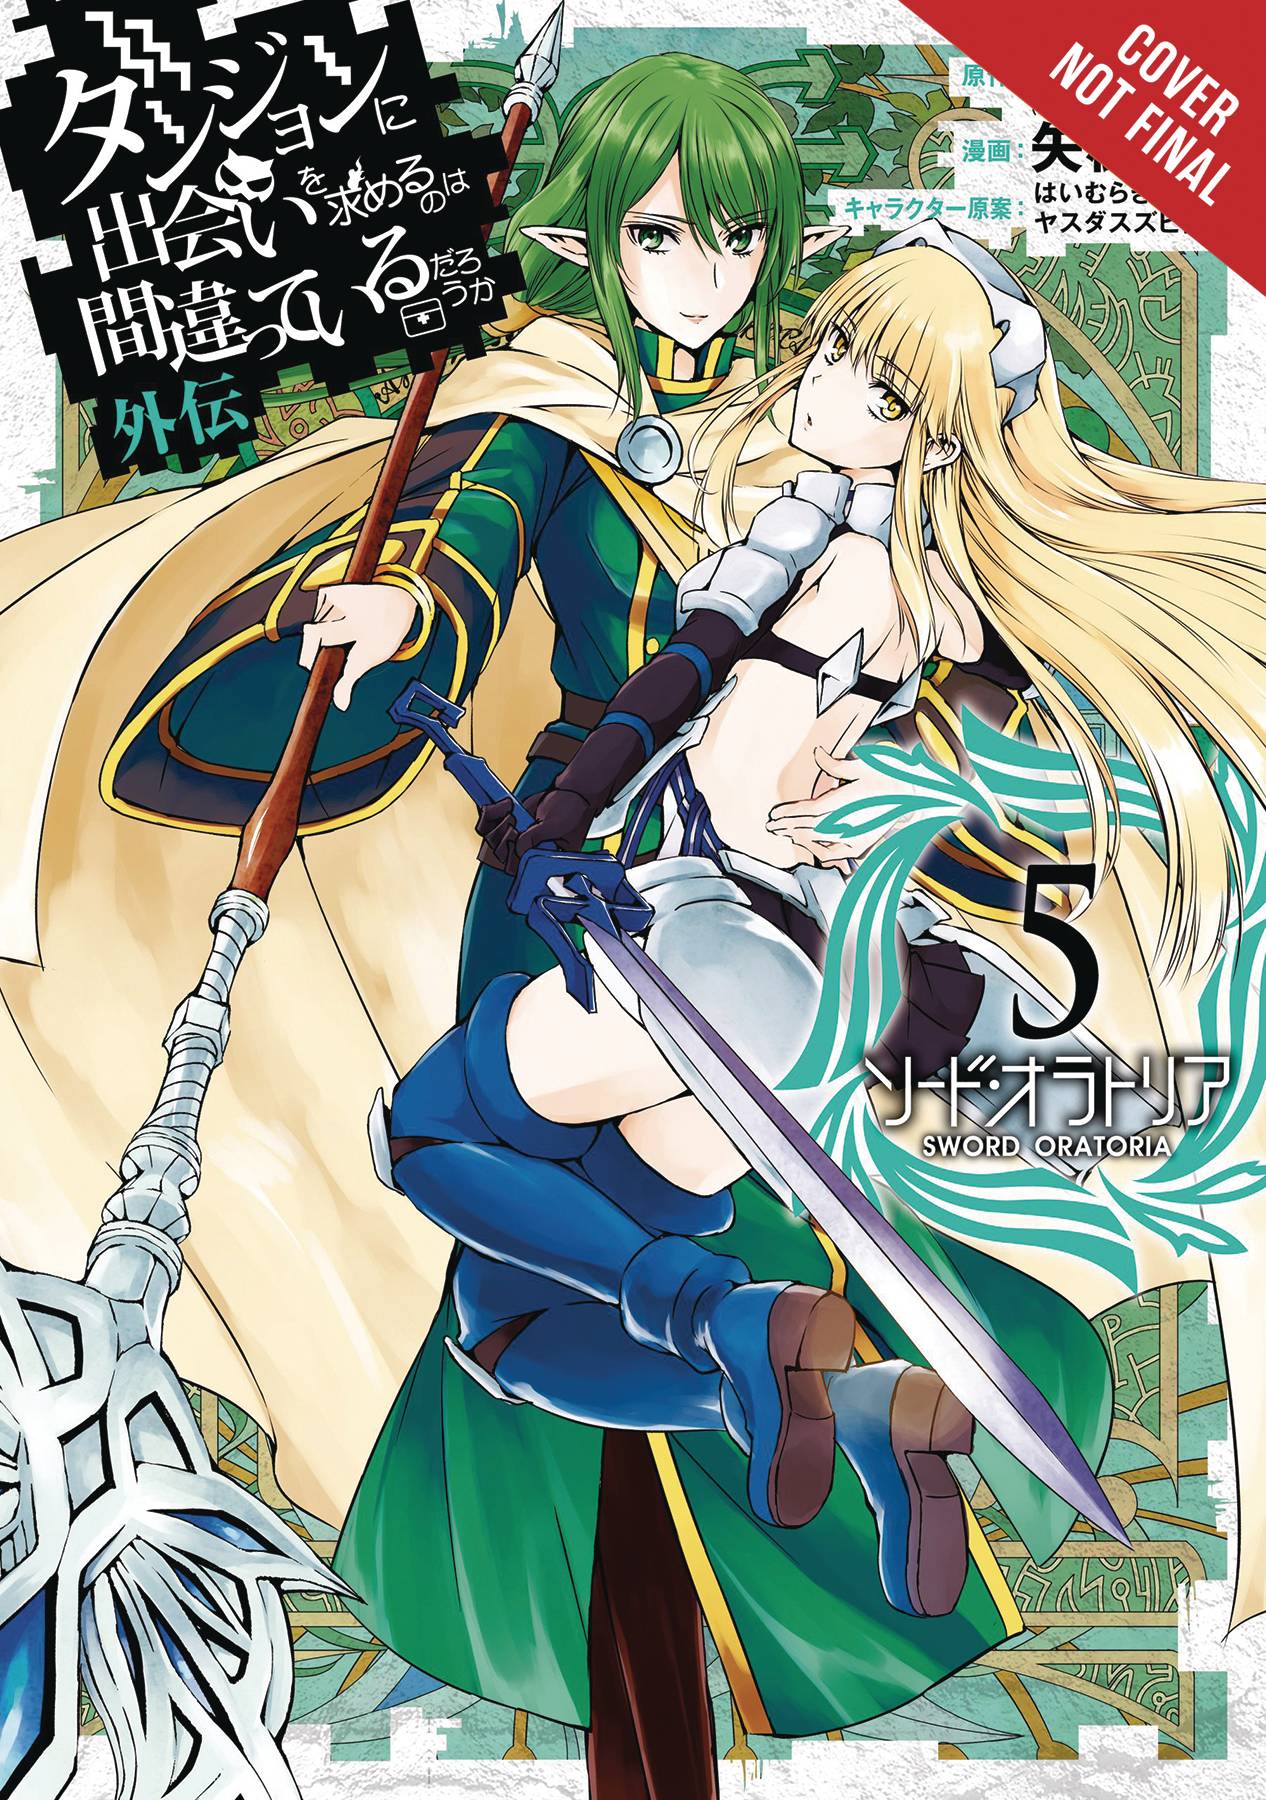 Is It Wrong to Try to Pick Up Girls in a Dungeon?: Sword Oratoria #5 (2018)